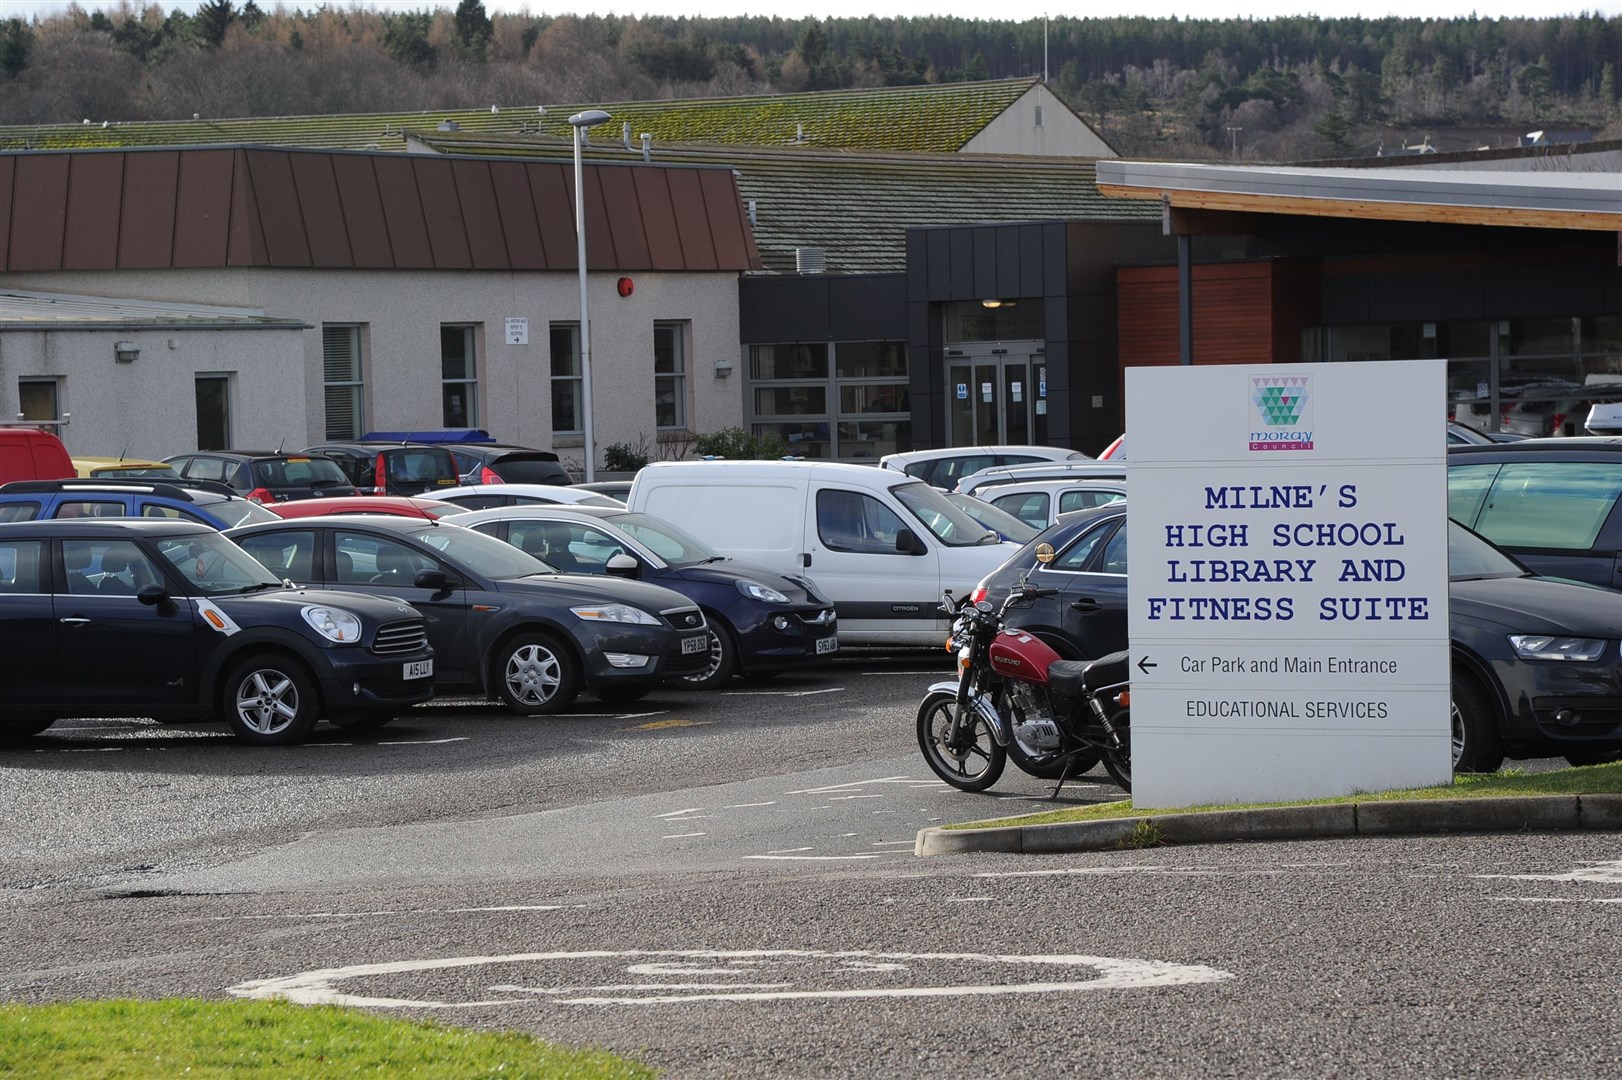 Covid measures are likely to remain in force after the holidays at Milne's and other Moray schools.